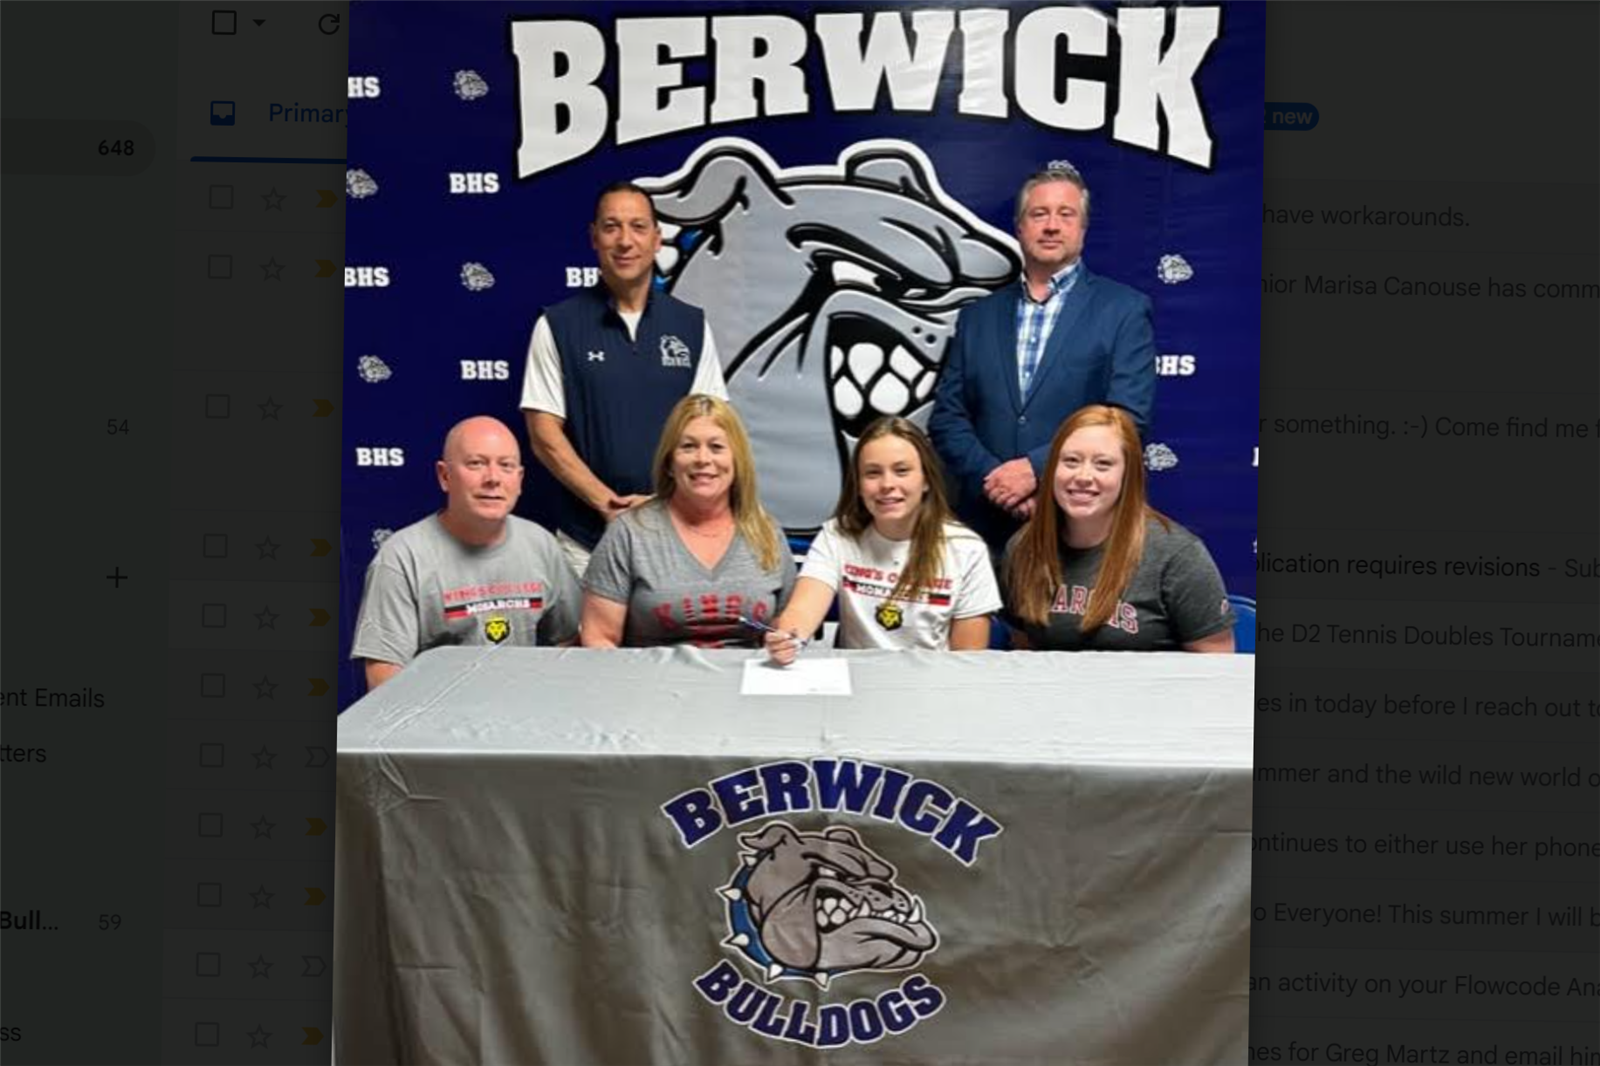  Berwick senior Marisa Canouse commits to study and play field hockey at King's College.